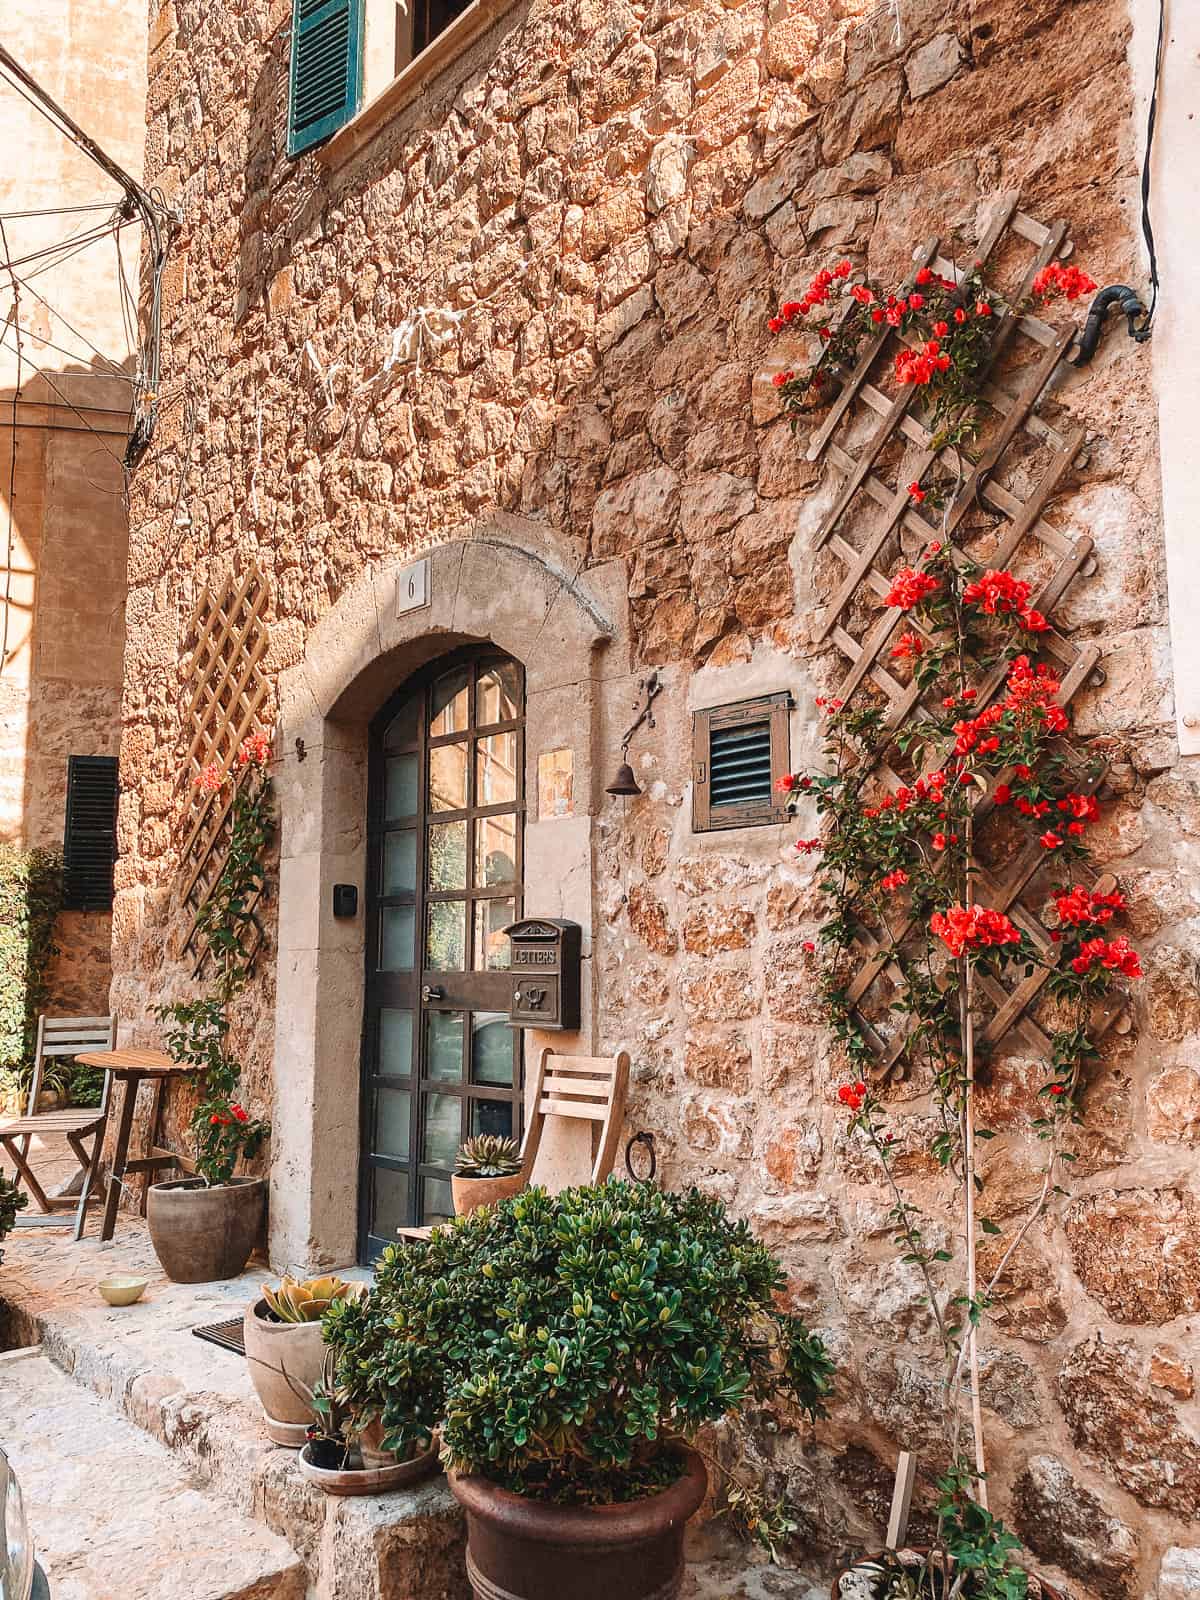 A beautiful stone building with a wooden door and pink flowers